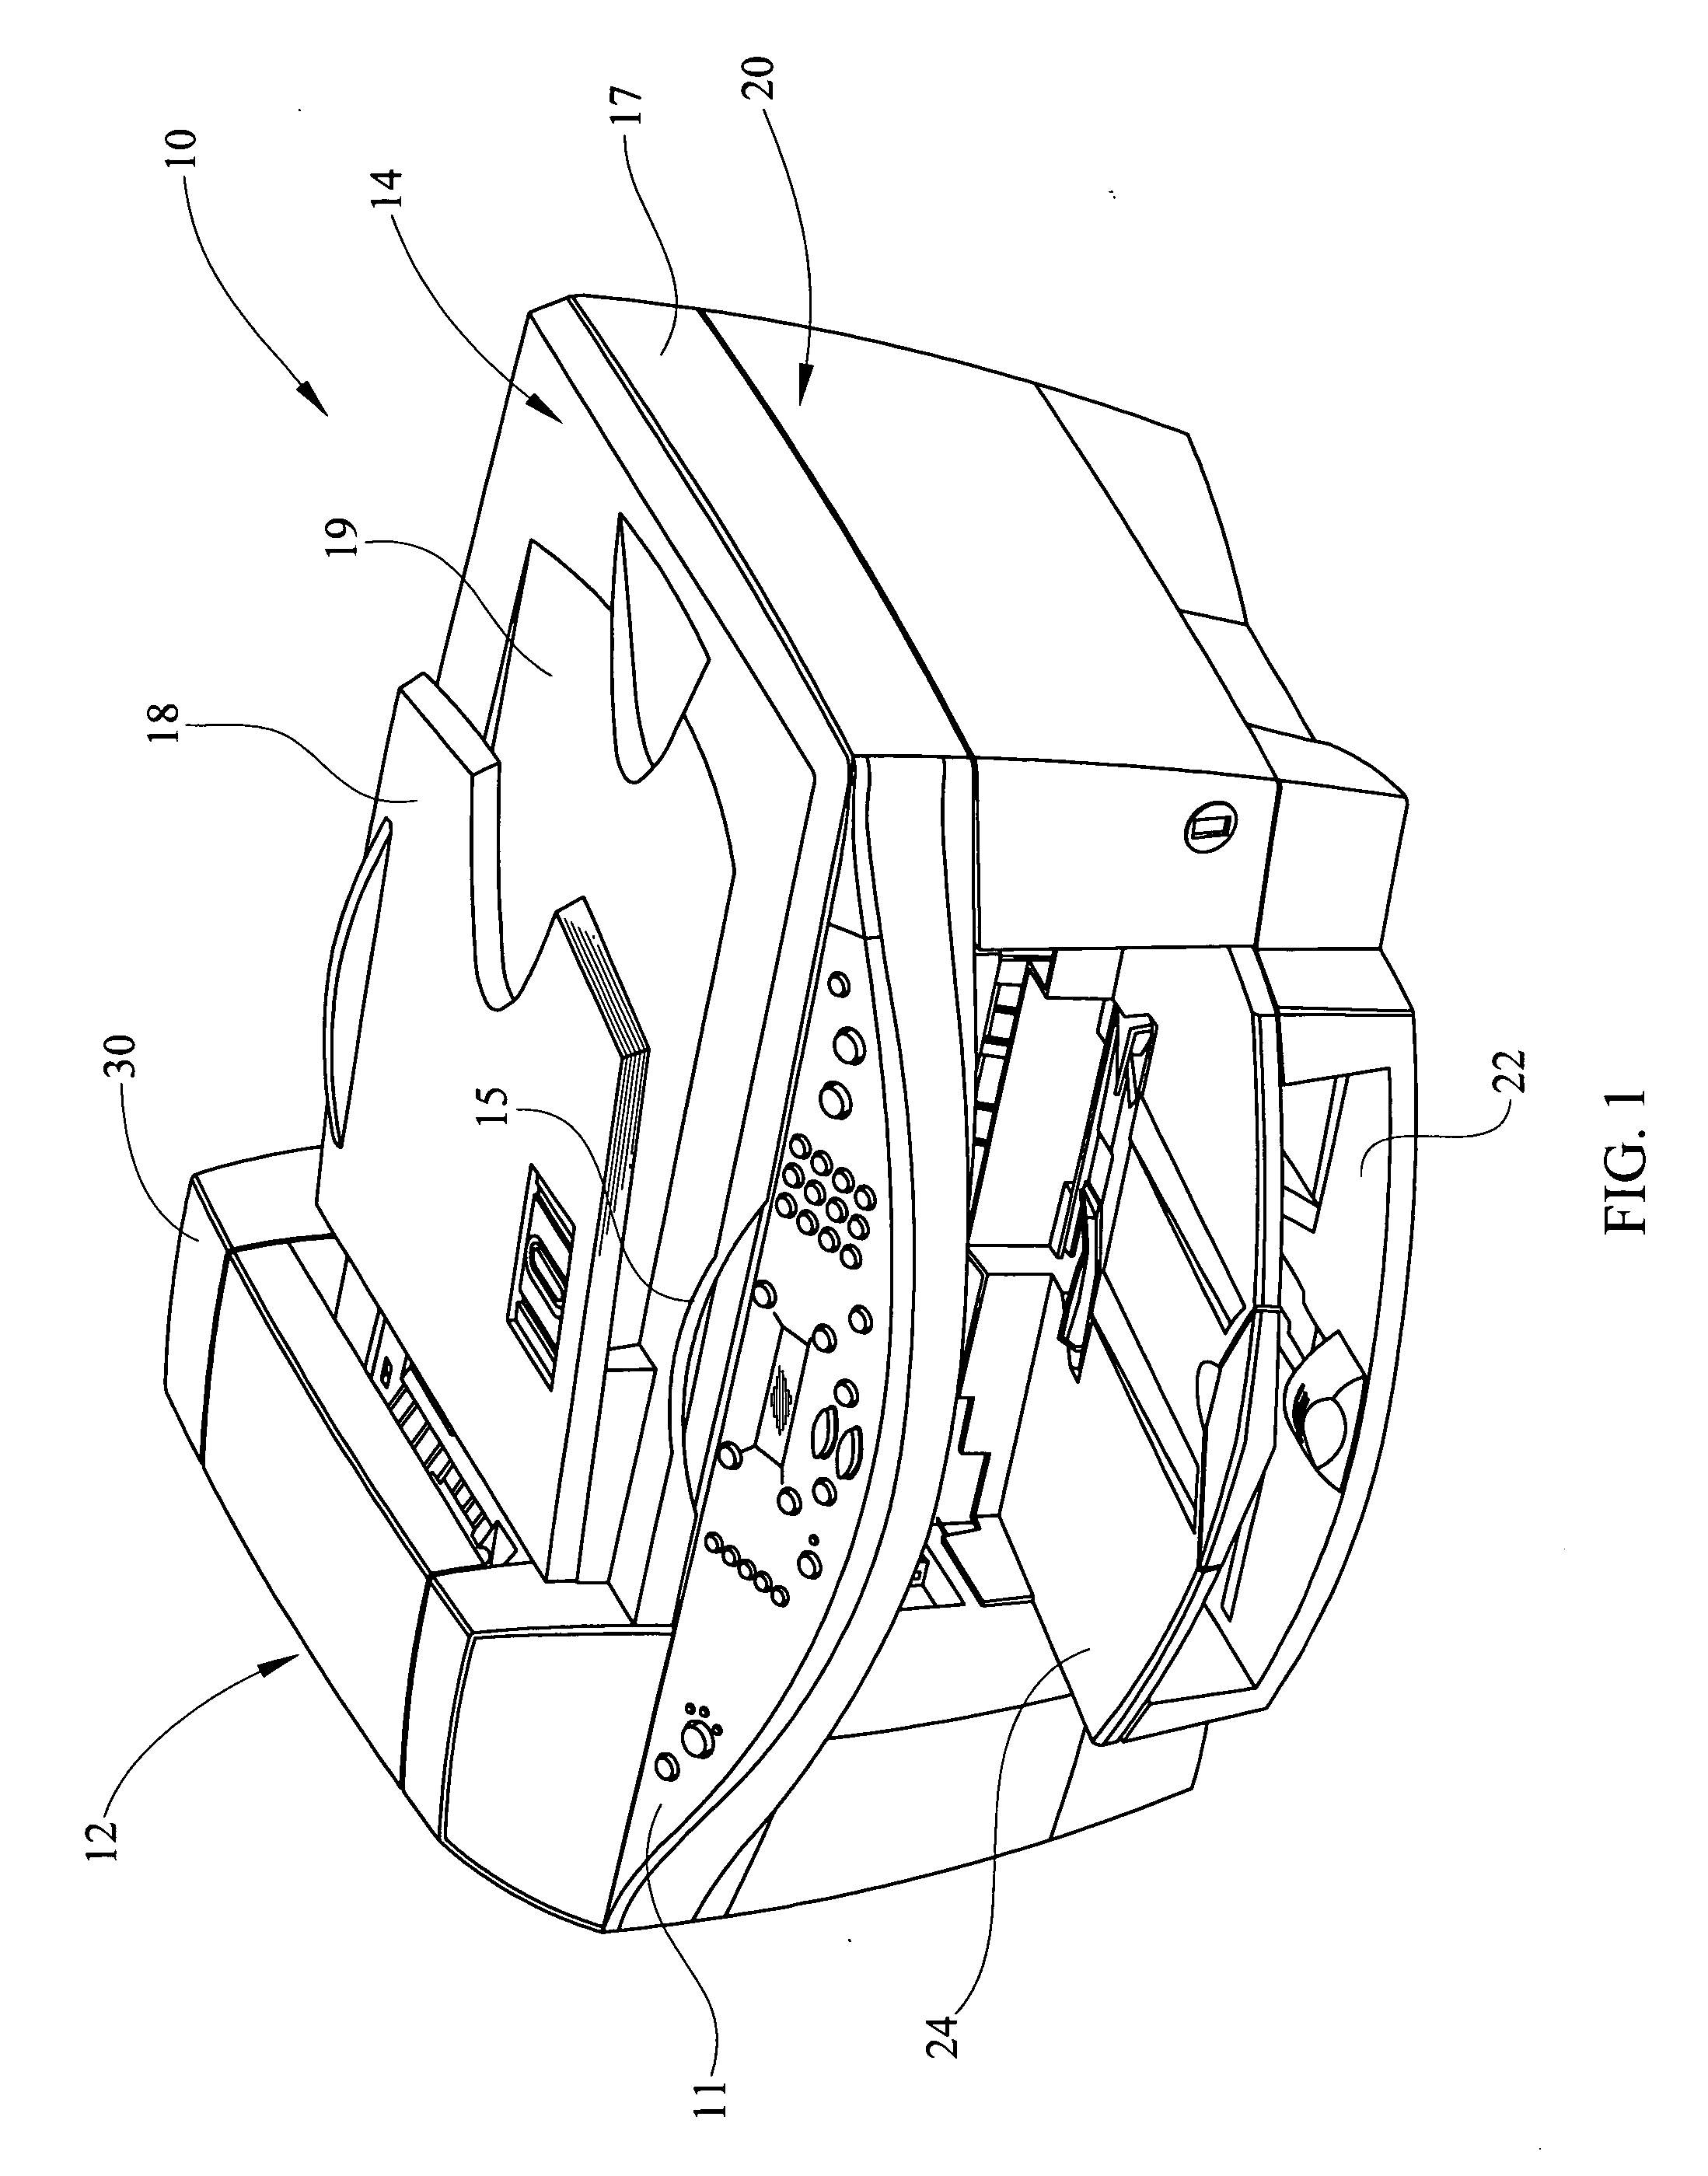 Apparatus for and method of creating a duplex scan using a single pass ADF